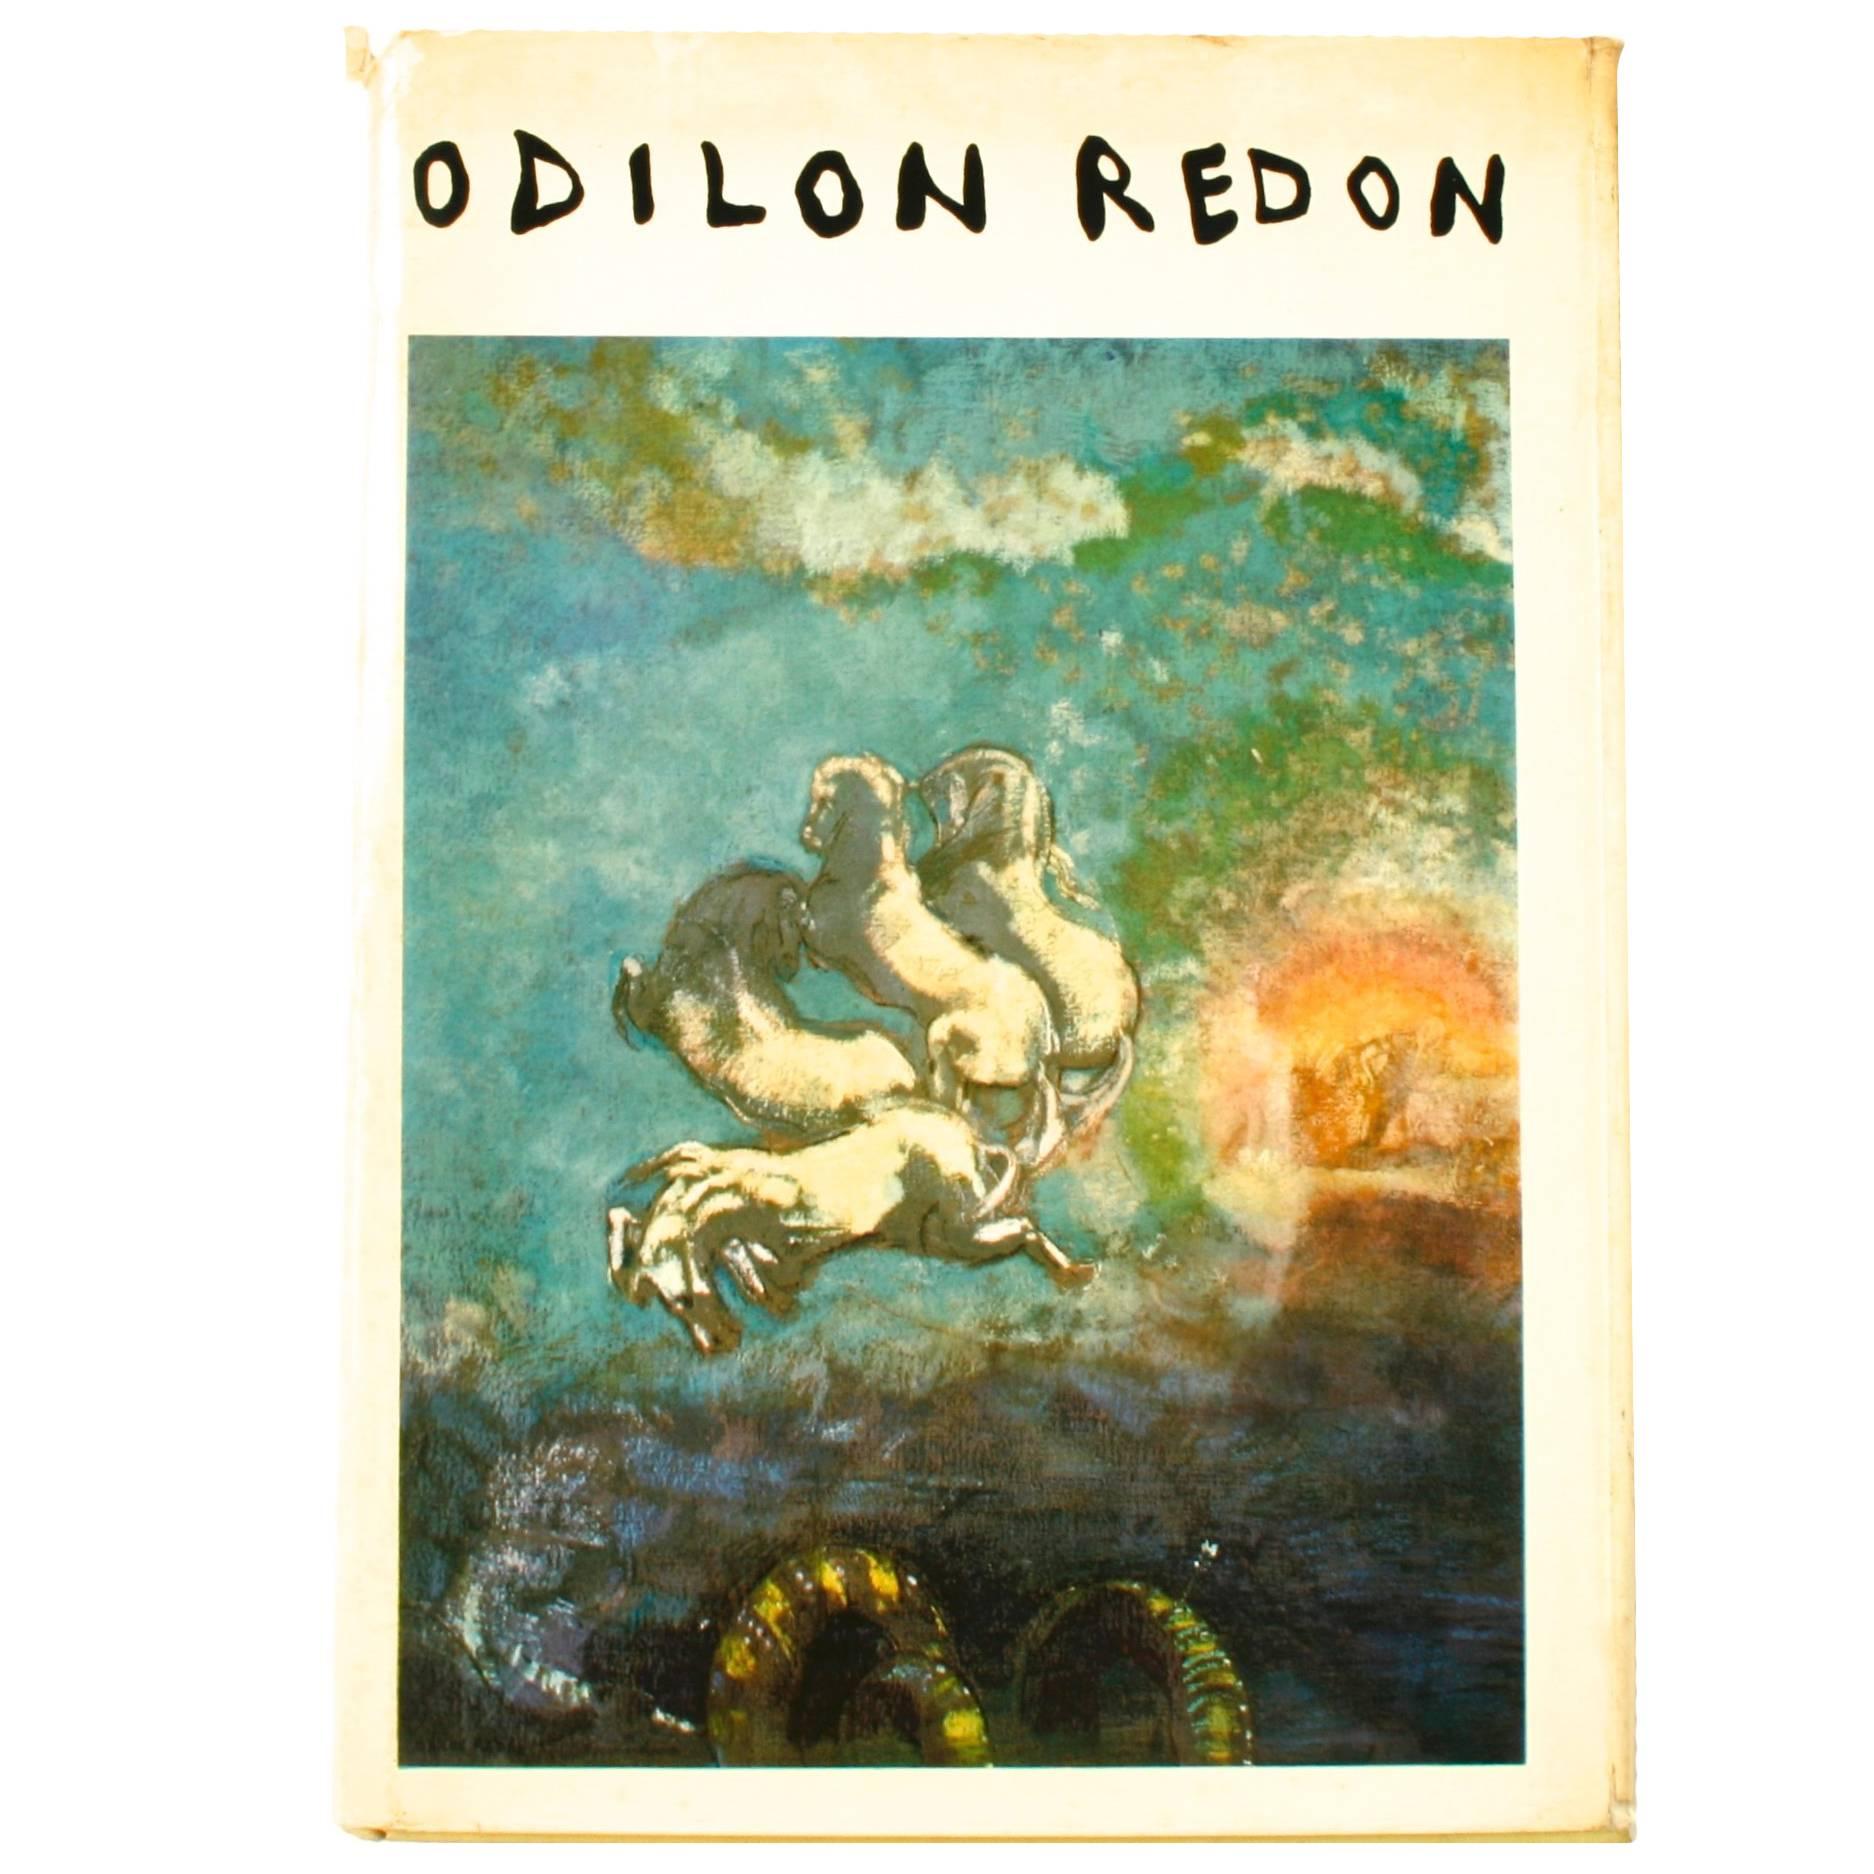 "Odilon Redon", Fantasy and Color, First Edition